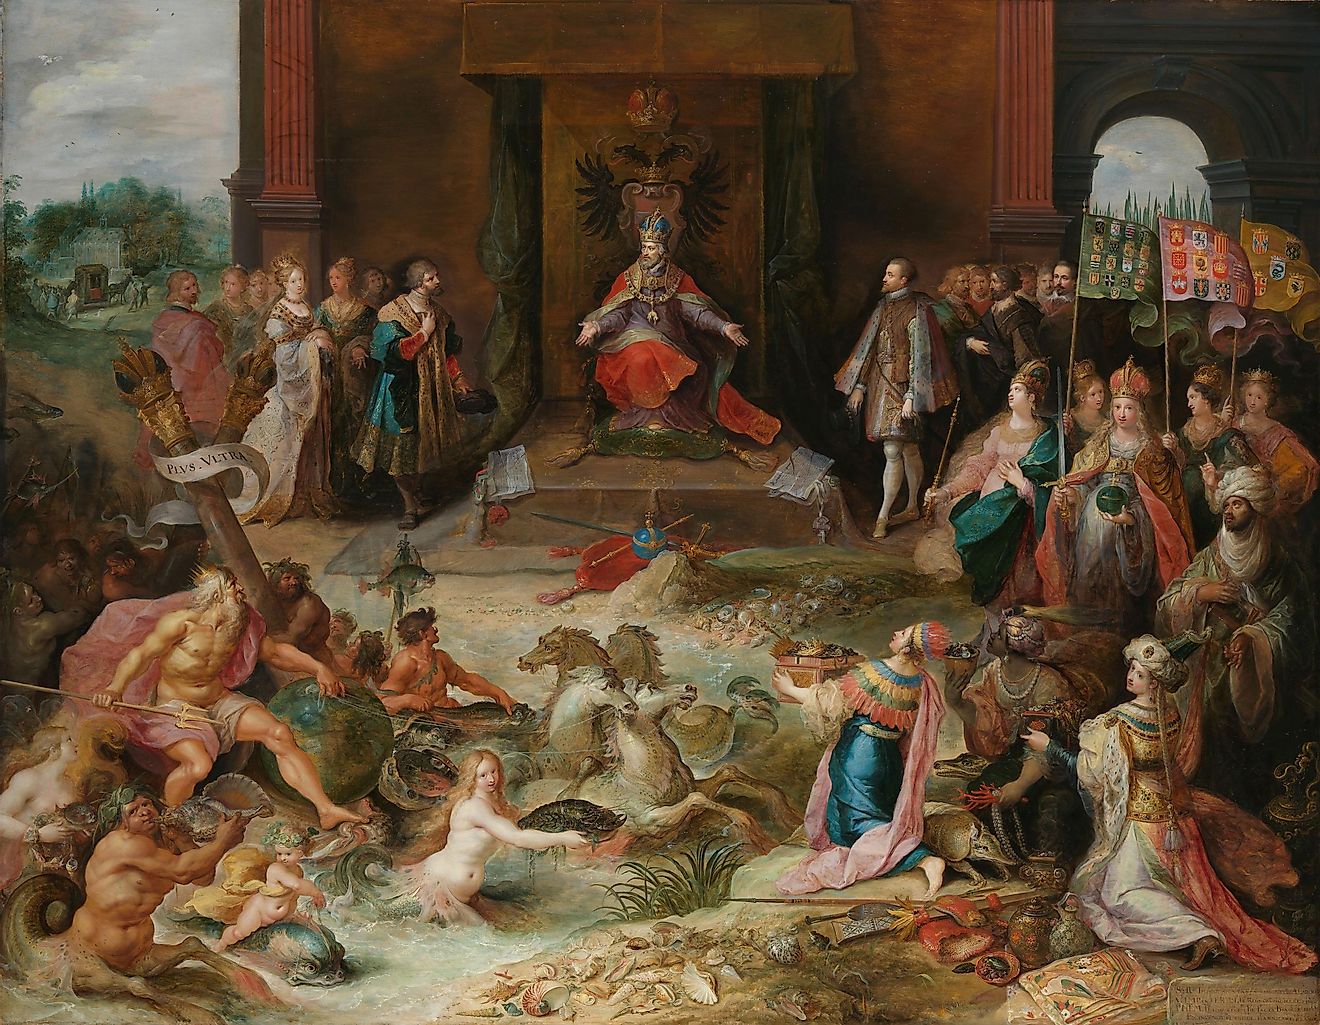 Frans Francken the Younger's depiction of Charles V in the allegorical act of dividing the entire world between Philip II of Spain and Emperor Ferdinand I.